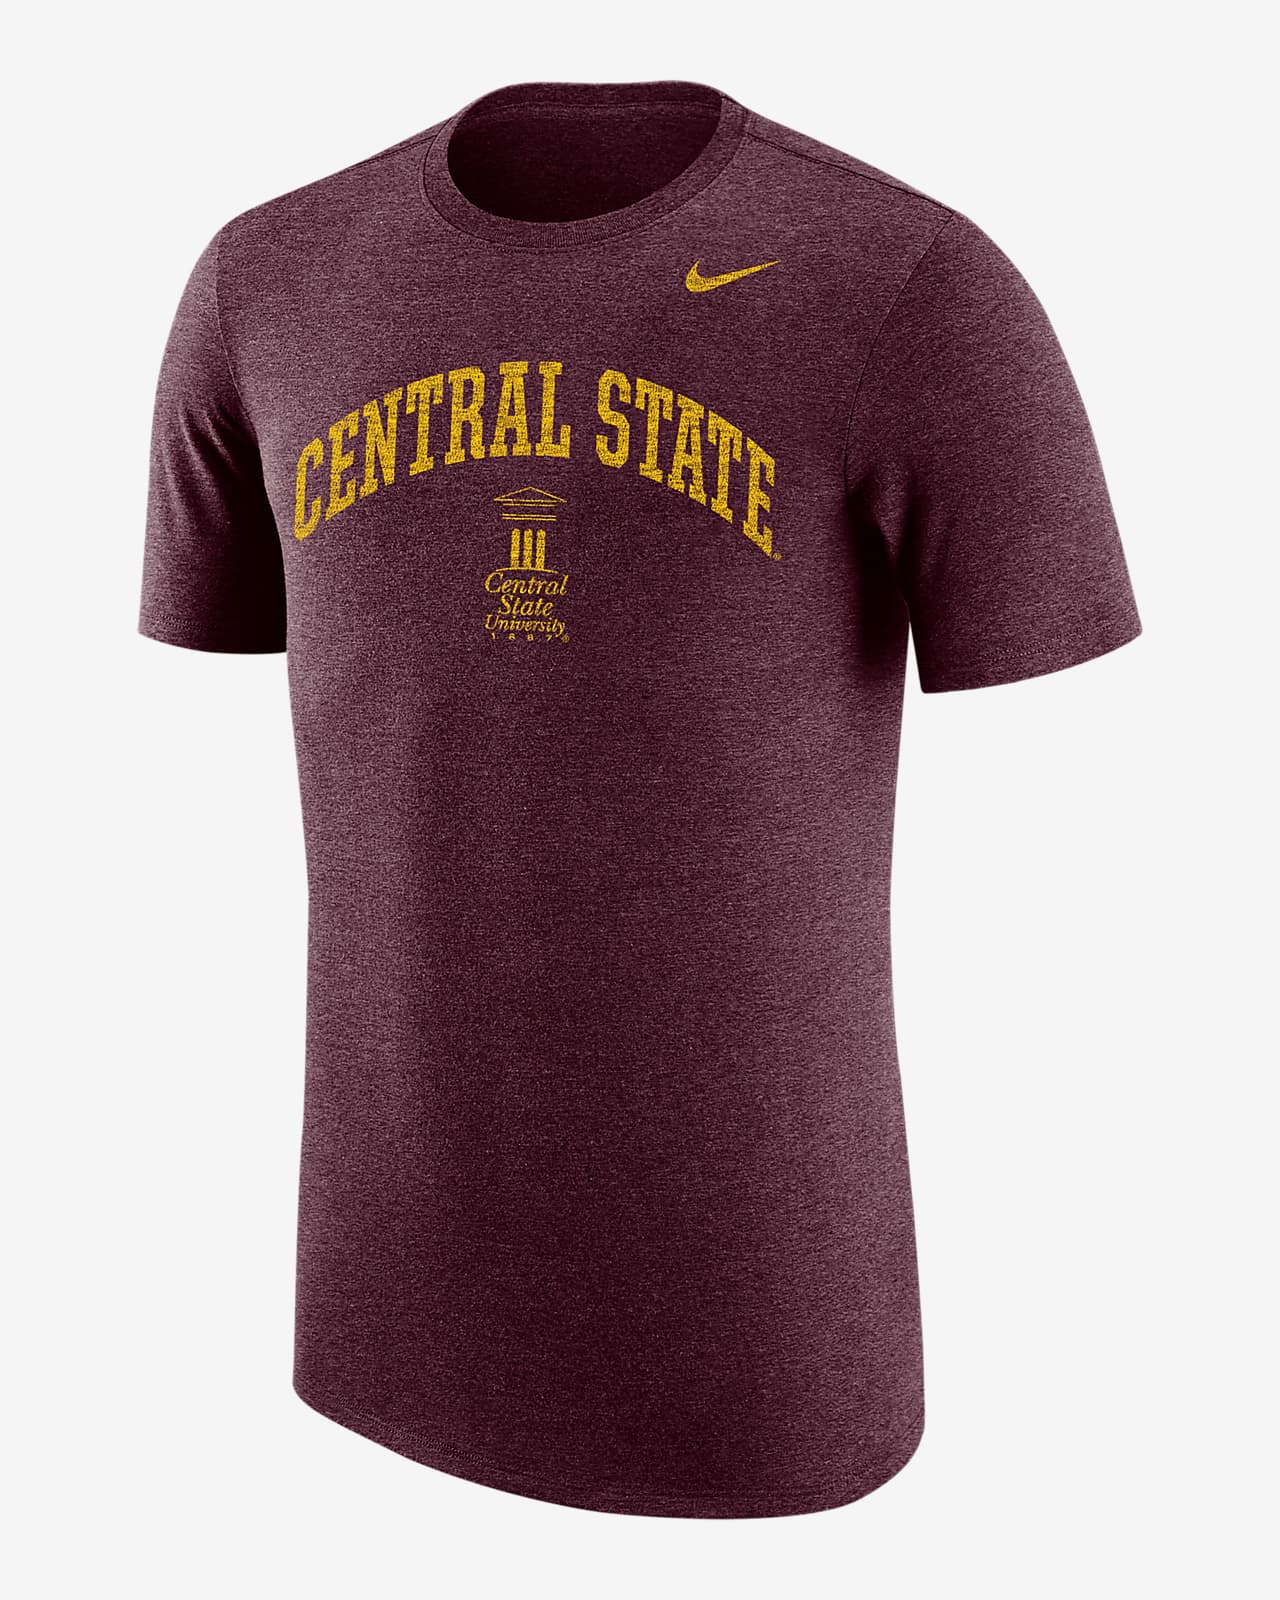 Nike College (Central State) Men's T-Shirt